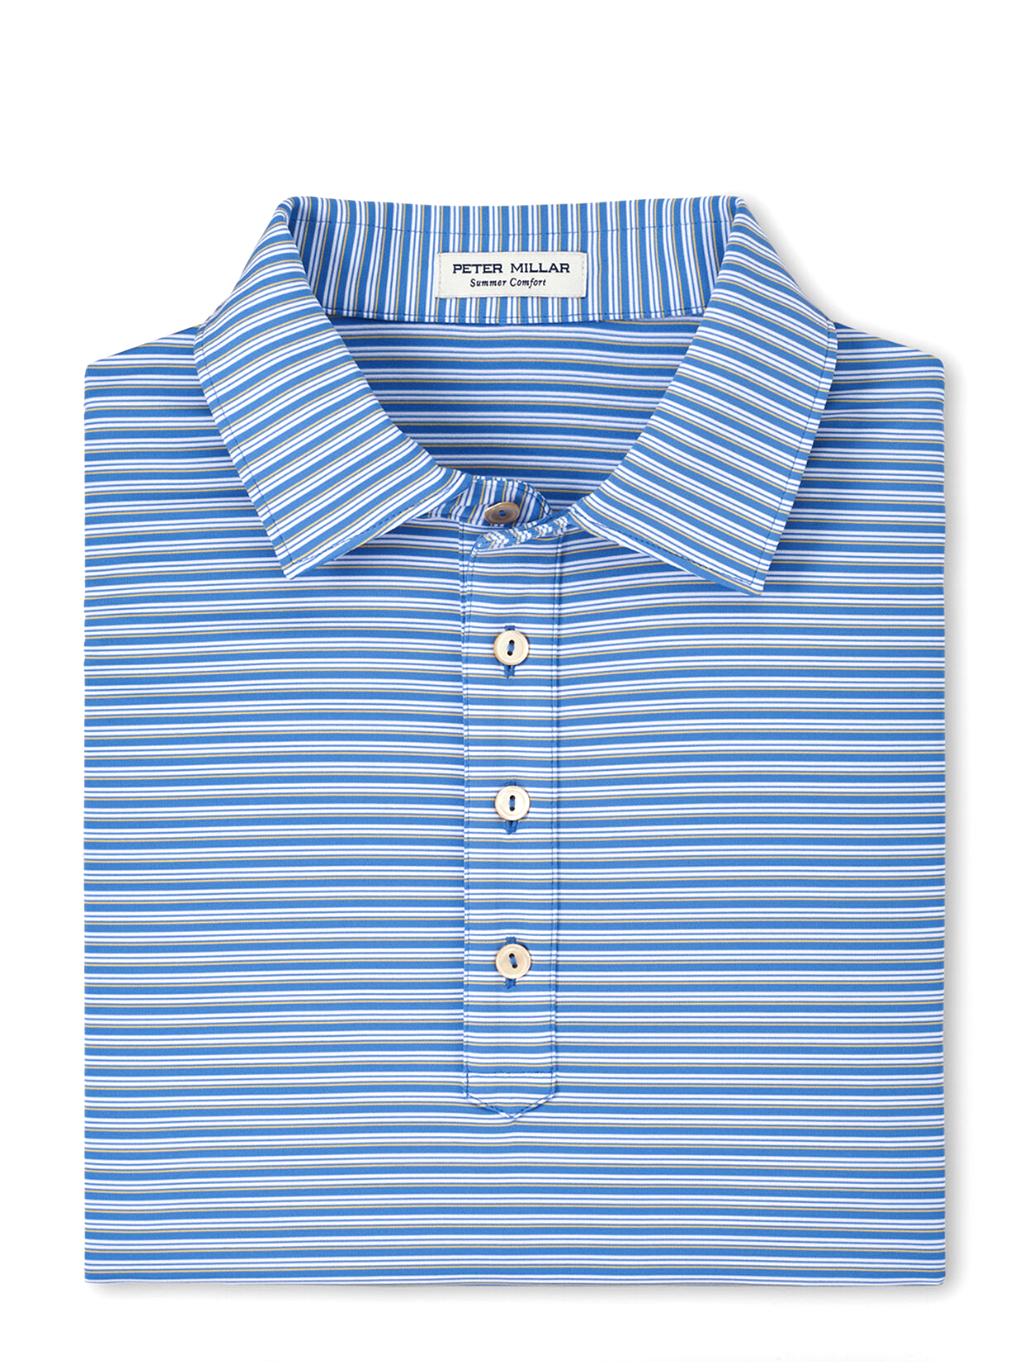 Bishop Perf Jersey Polo Maritime